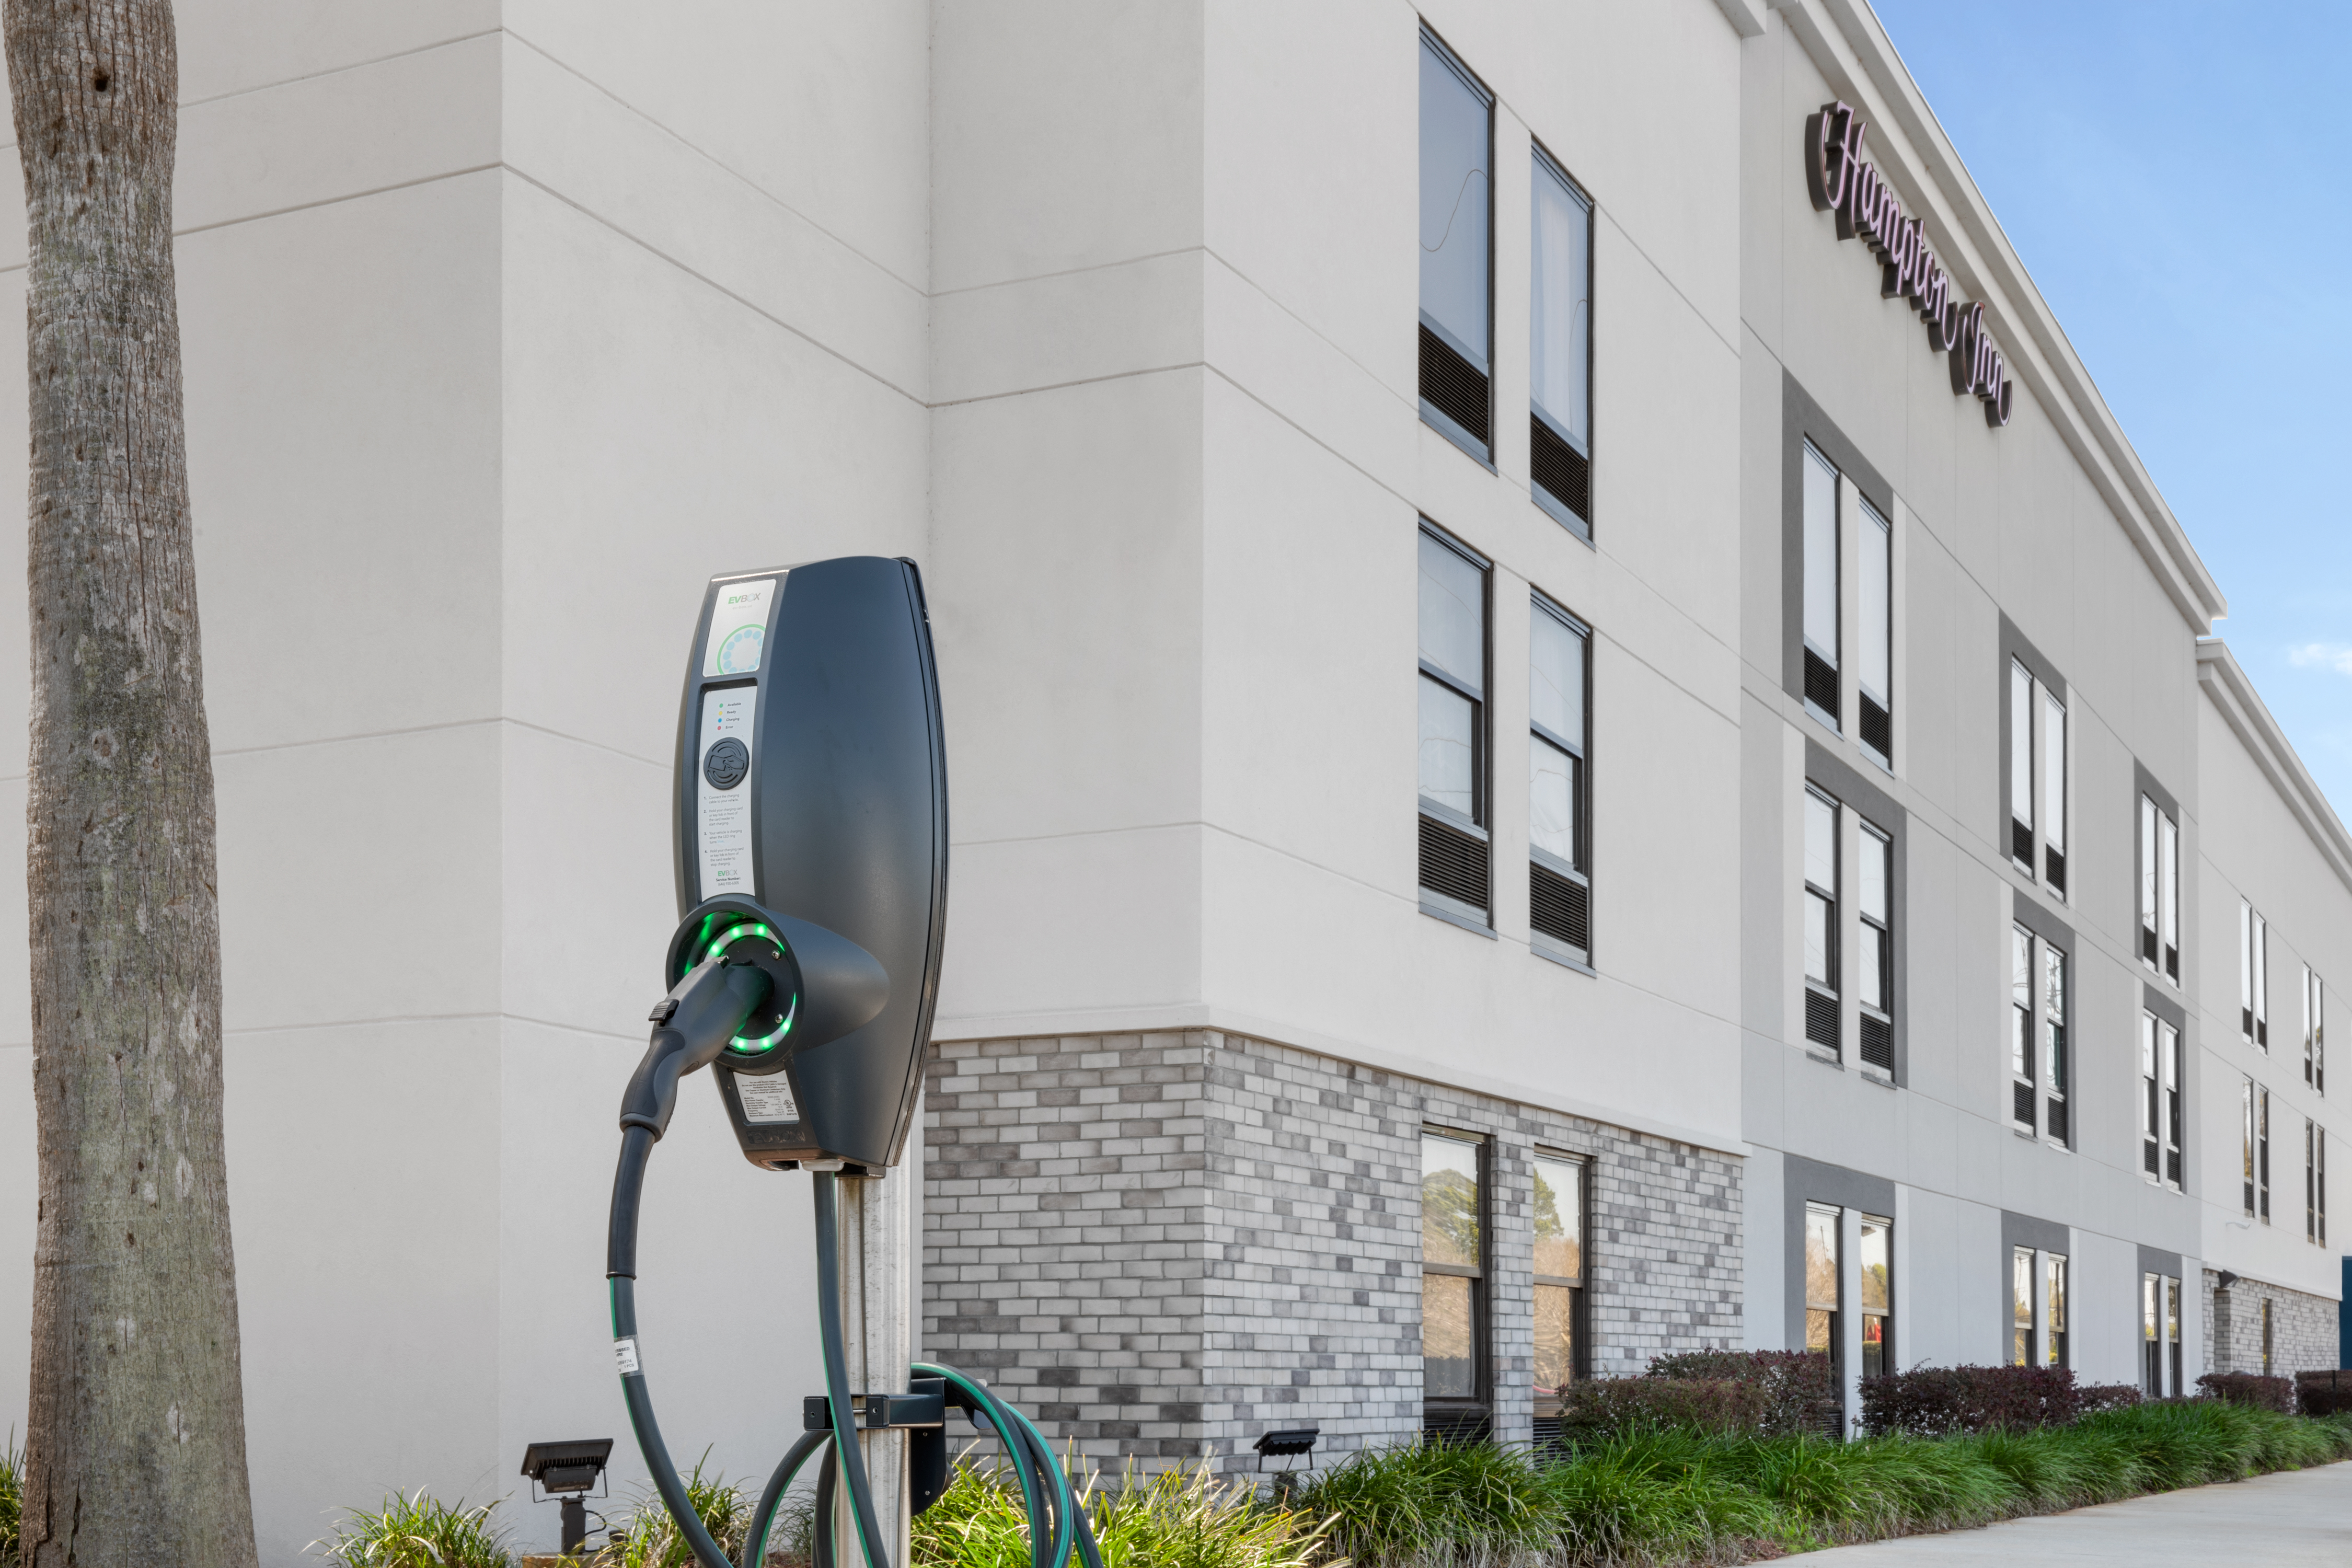 Electric Car Charger in Hotel Parking Lot